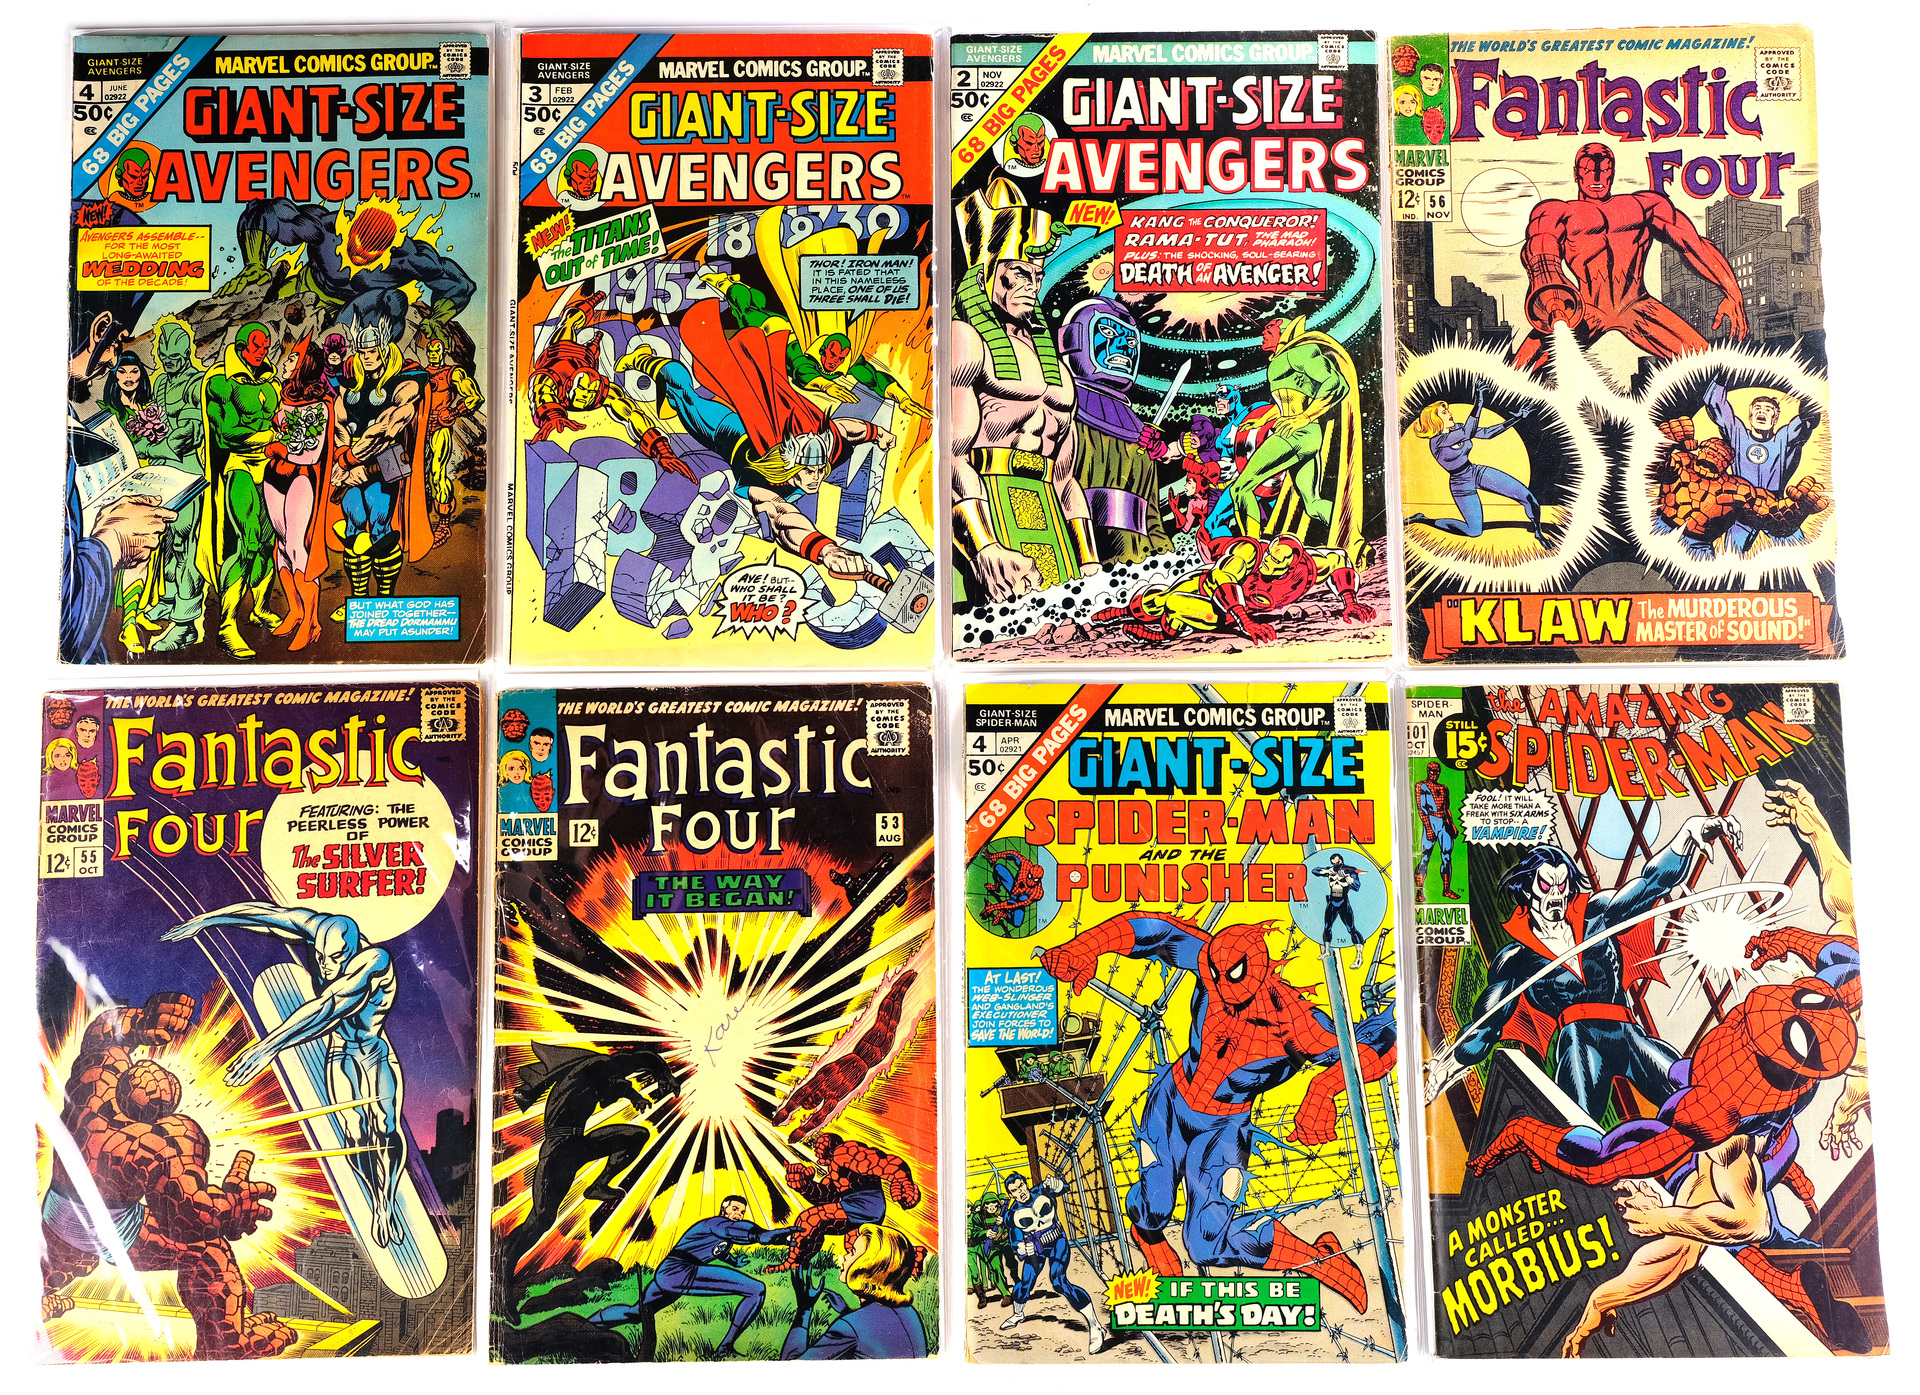 MARVEL COMICS - Giant-Size X-Men No. 1, Captain America No. 117, and Amazing Spider-Man No. 101 with - Image 3 of 5